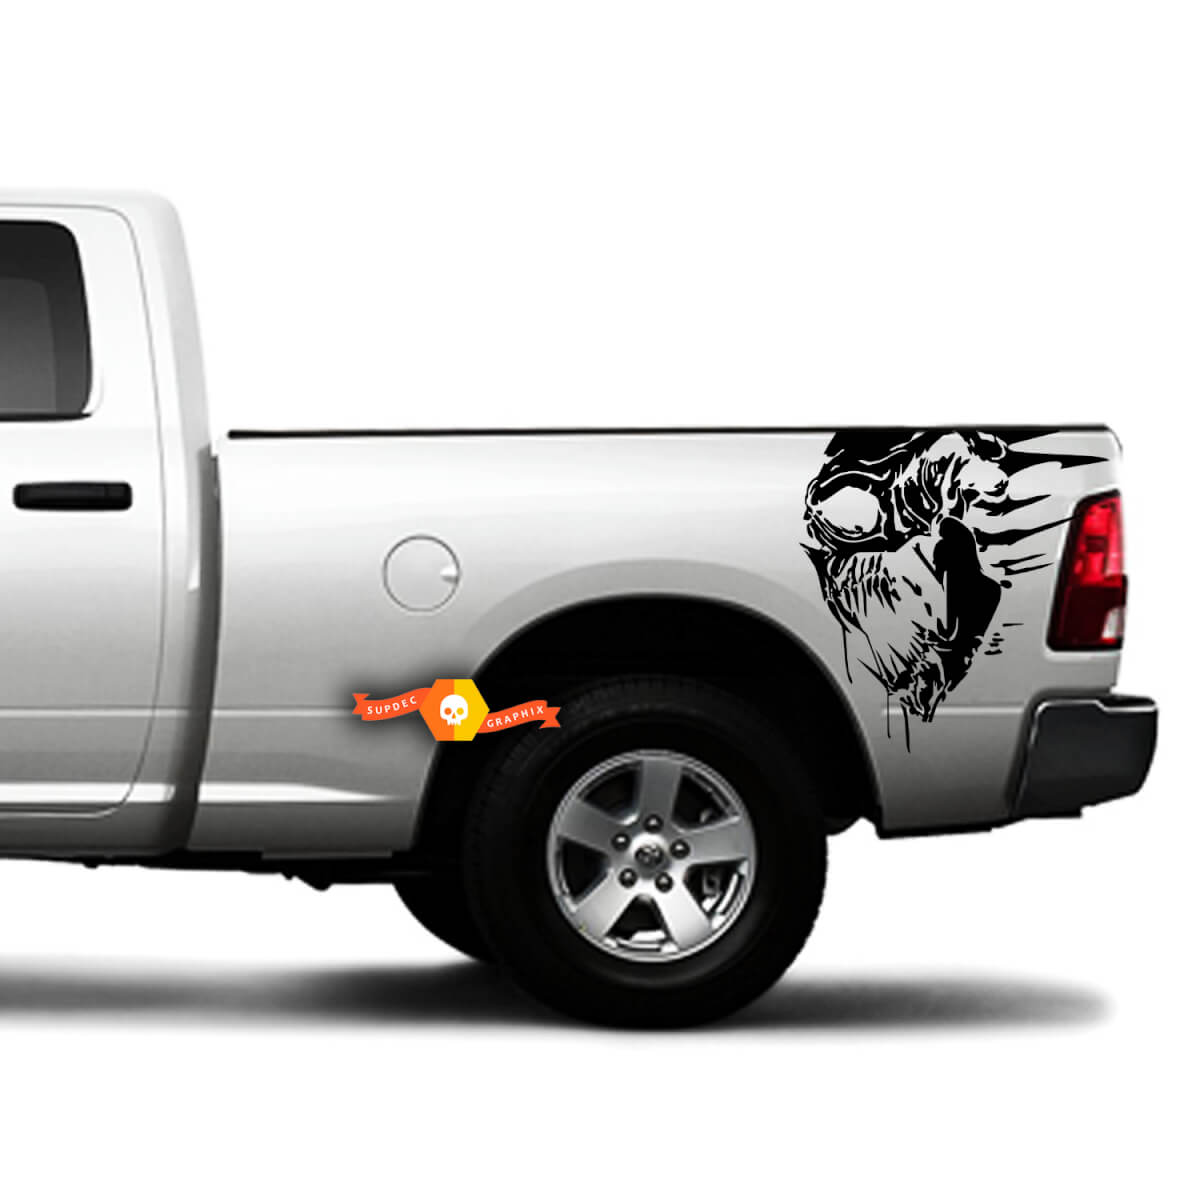 Dodge Ram Chevy Ford Grunge Skull Side Truck Vinyl Graphic Decal bed Tailgate